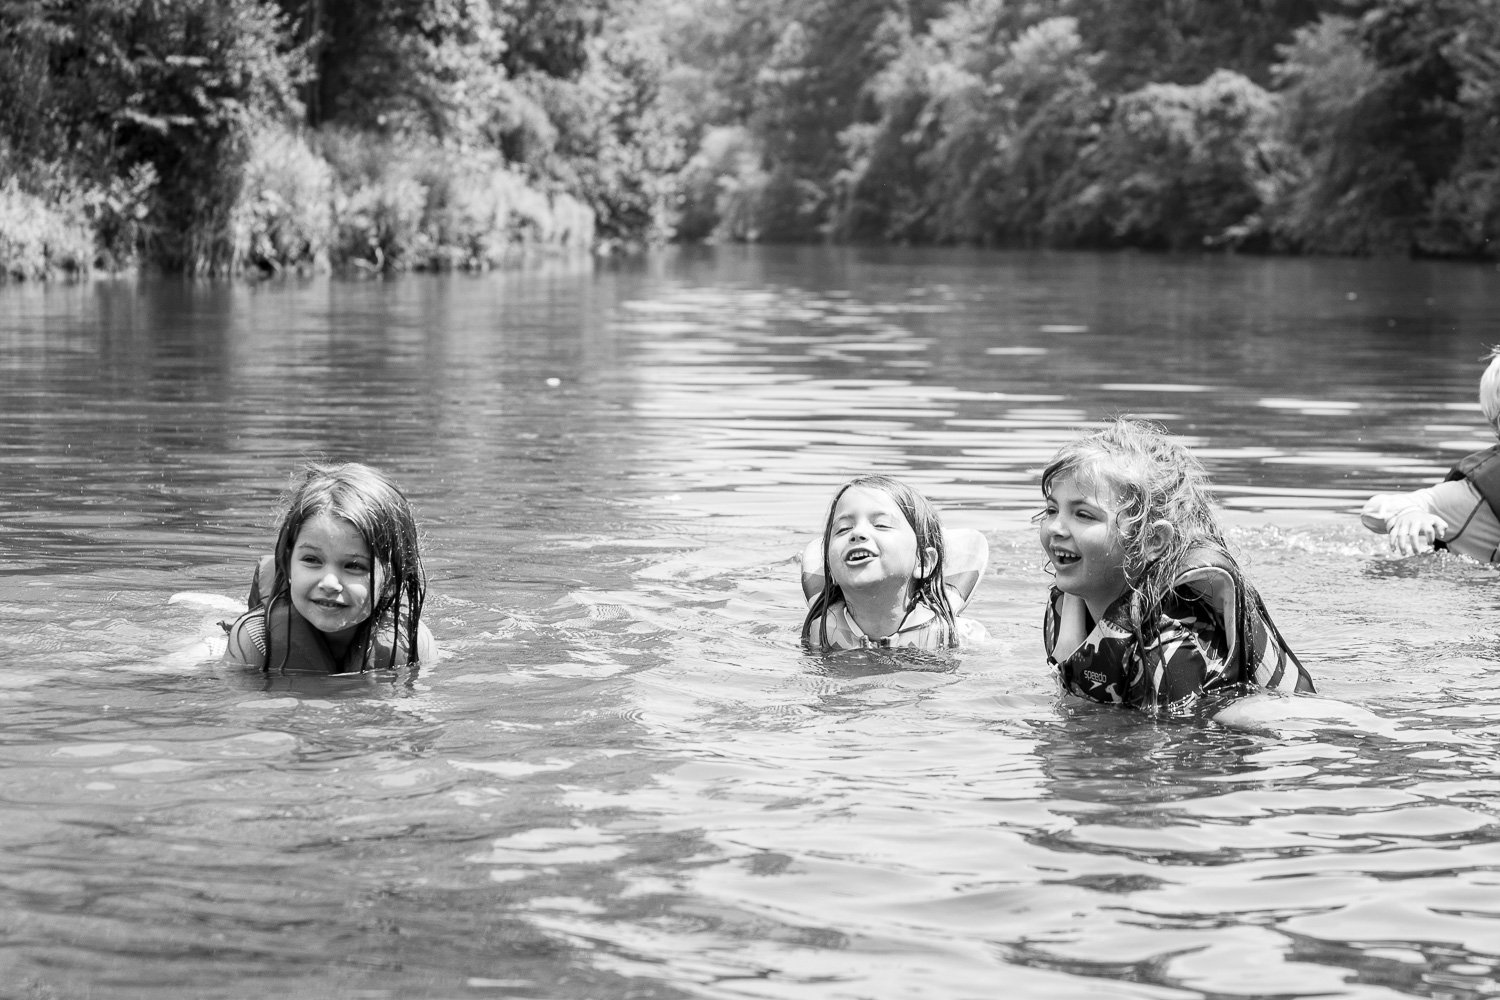 At CBI Camp: Journeys, a summer camp in Charlottesville, Virginia, campers swim in the river